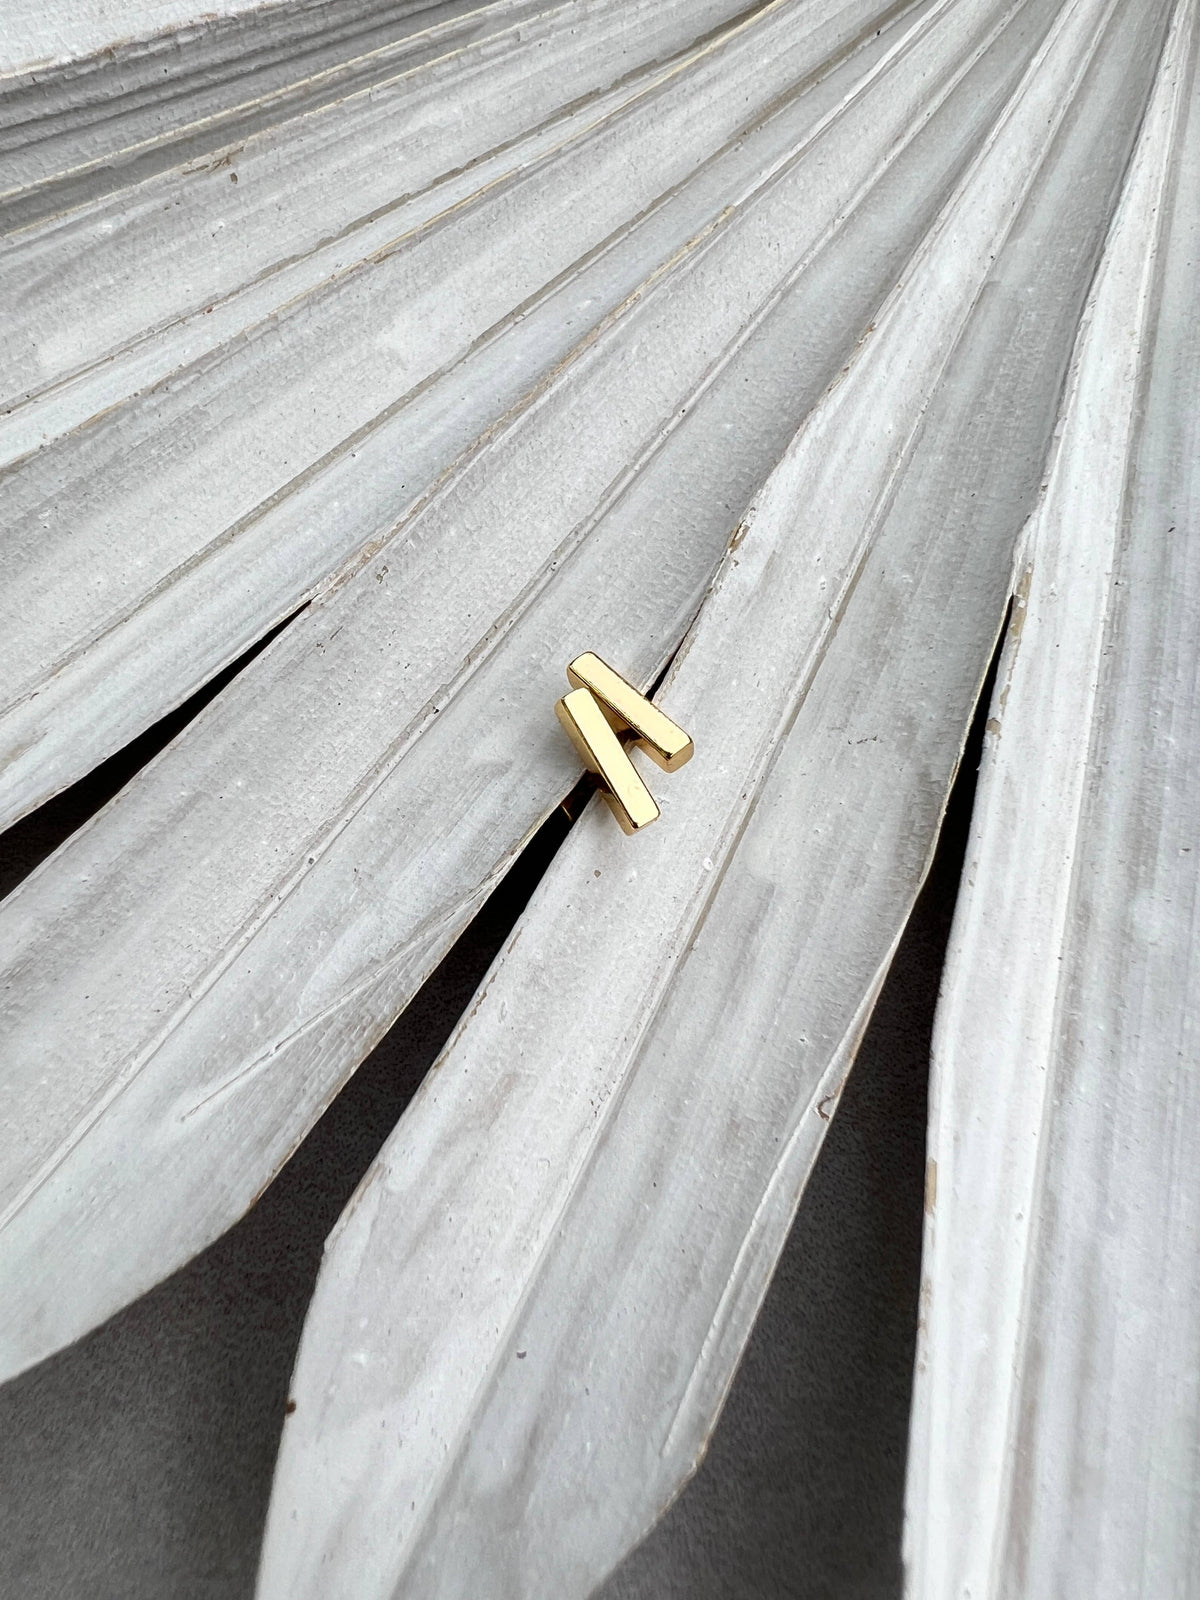 These flawless gold bar earrings are the ideal choice for daily wear. The bar design effortlessly catches the eye while maintaining a subtle elegance, providing you with a stylish and understated appearance. Plated with 18k gold.